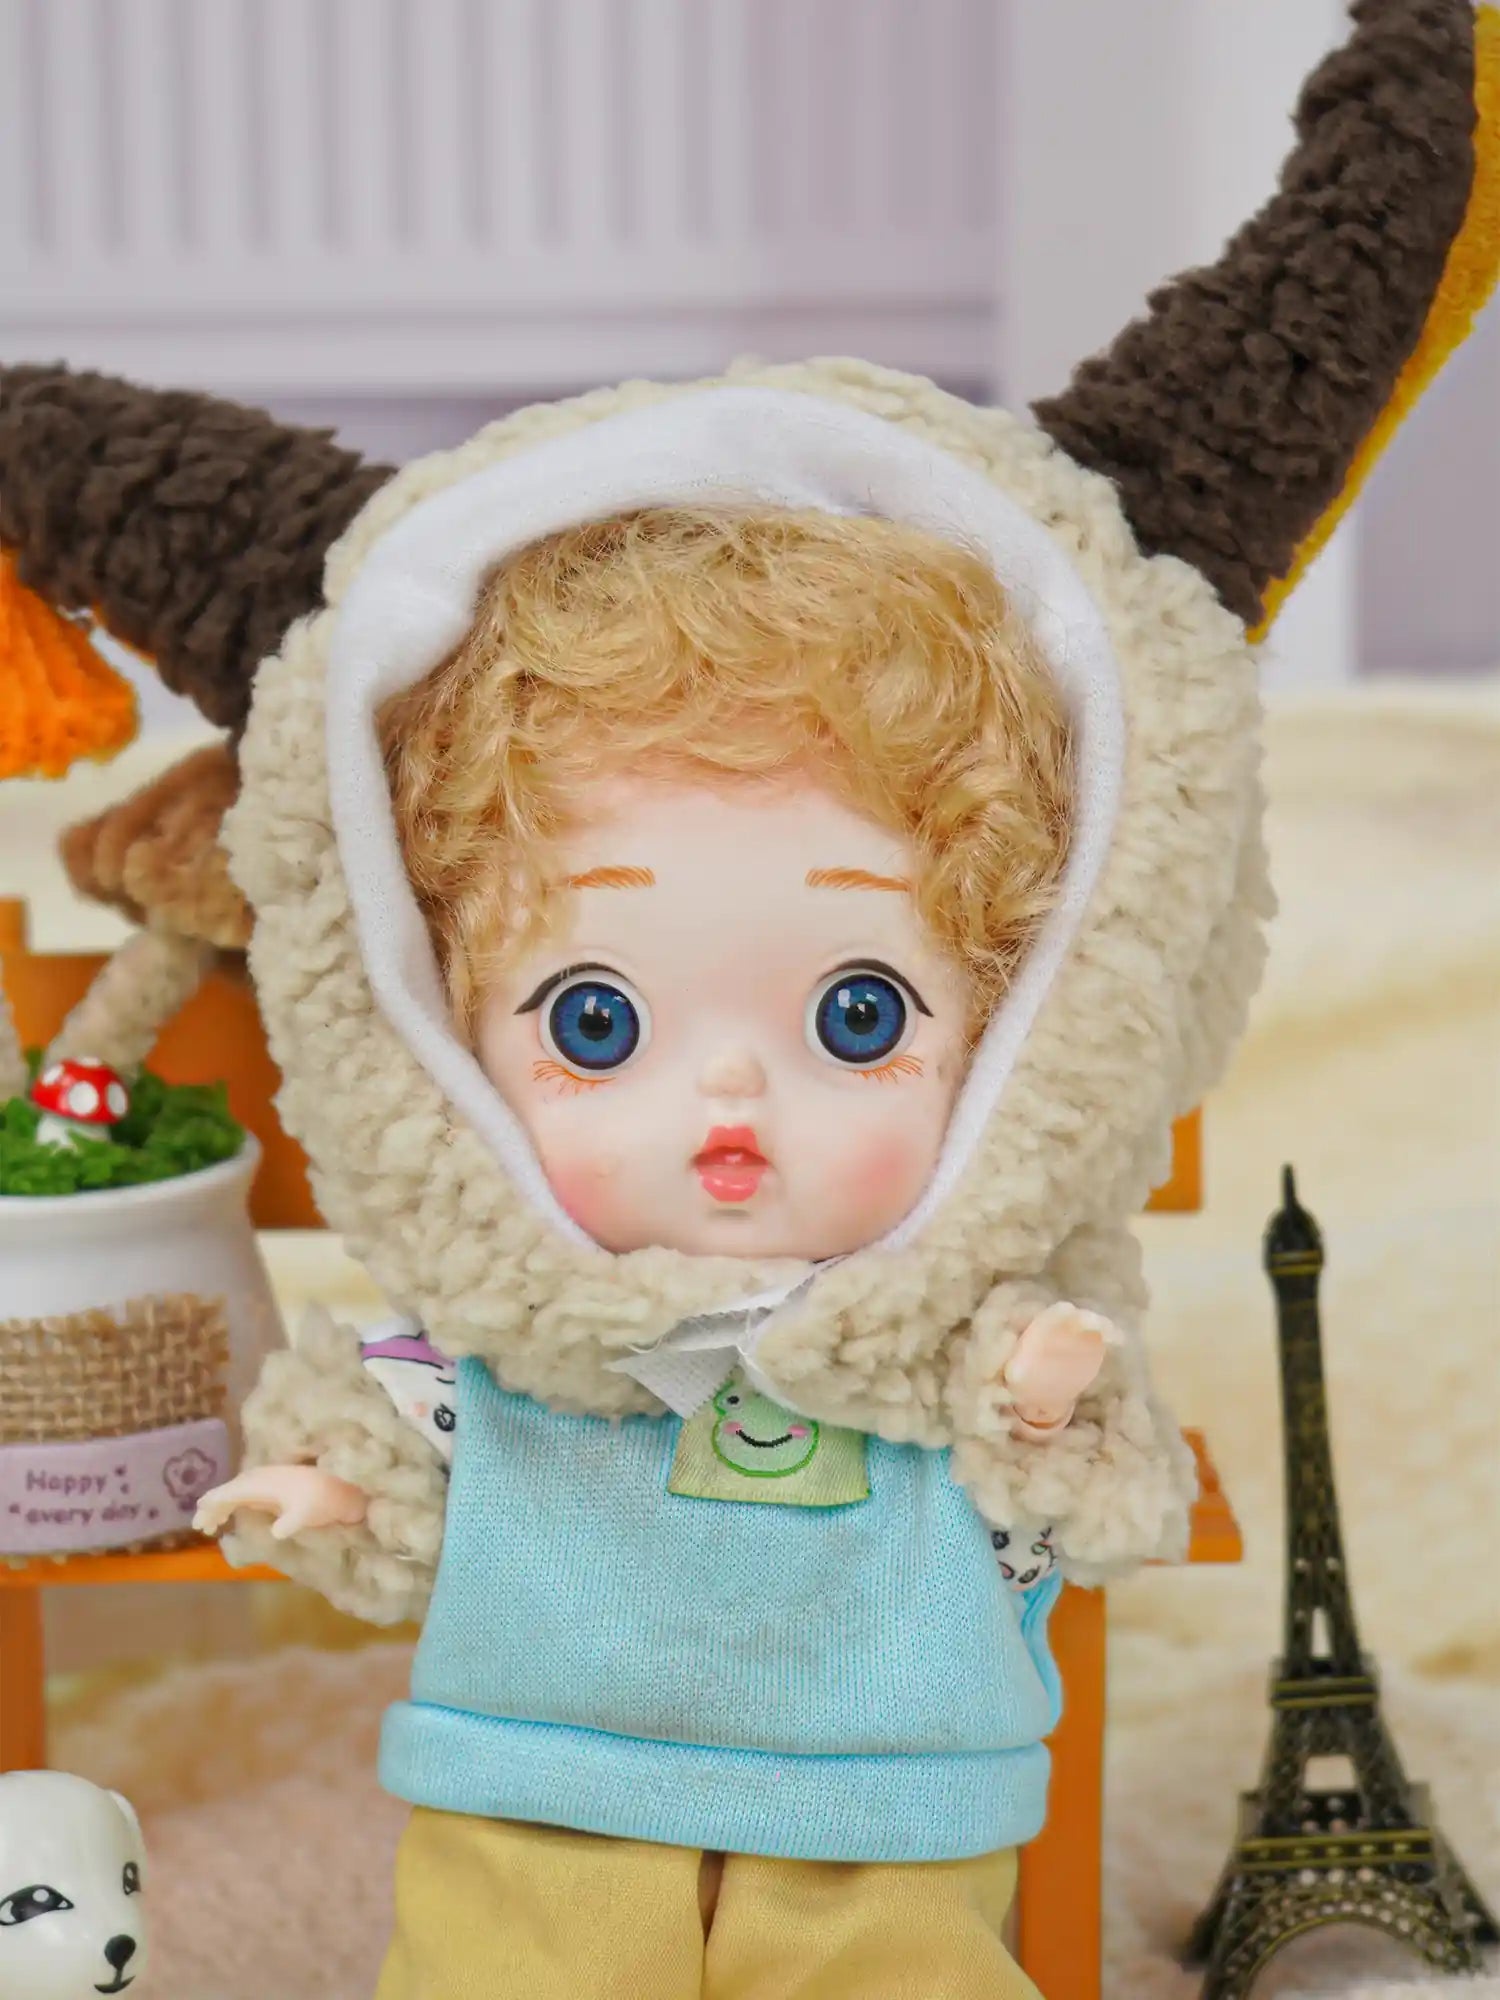 A BJD in a cute lamb outfit holds the attention with its vivid eyes, with a mini Eiffel Tower and toy dog as accents.